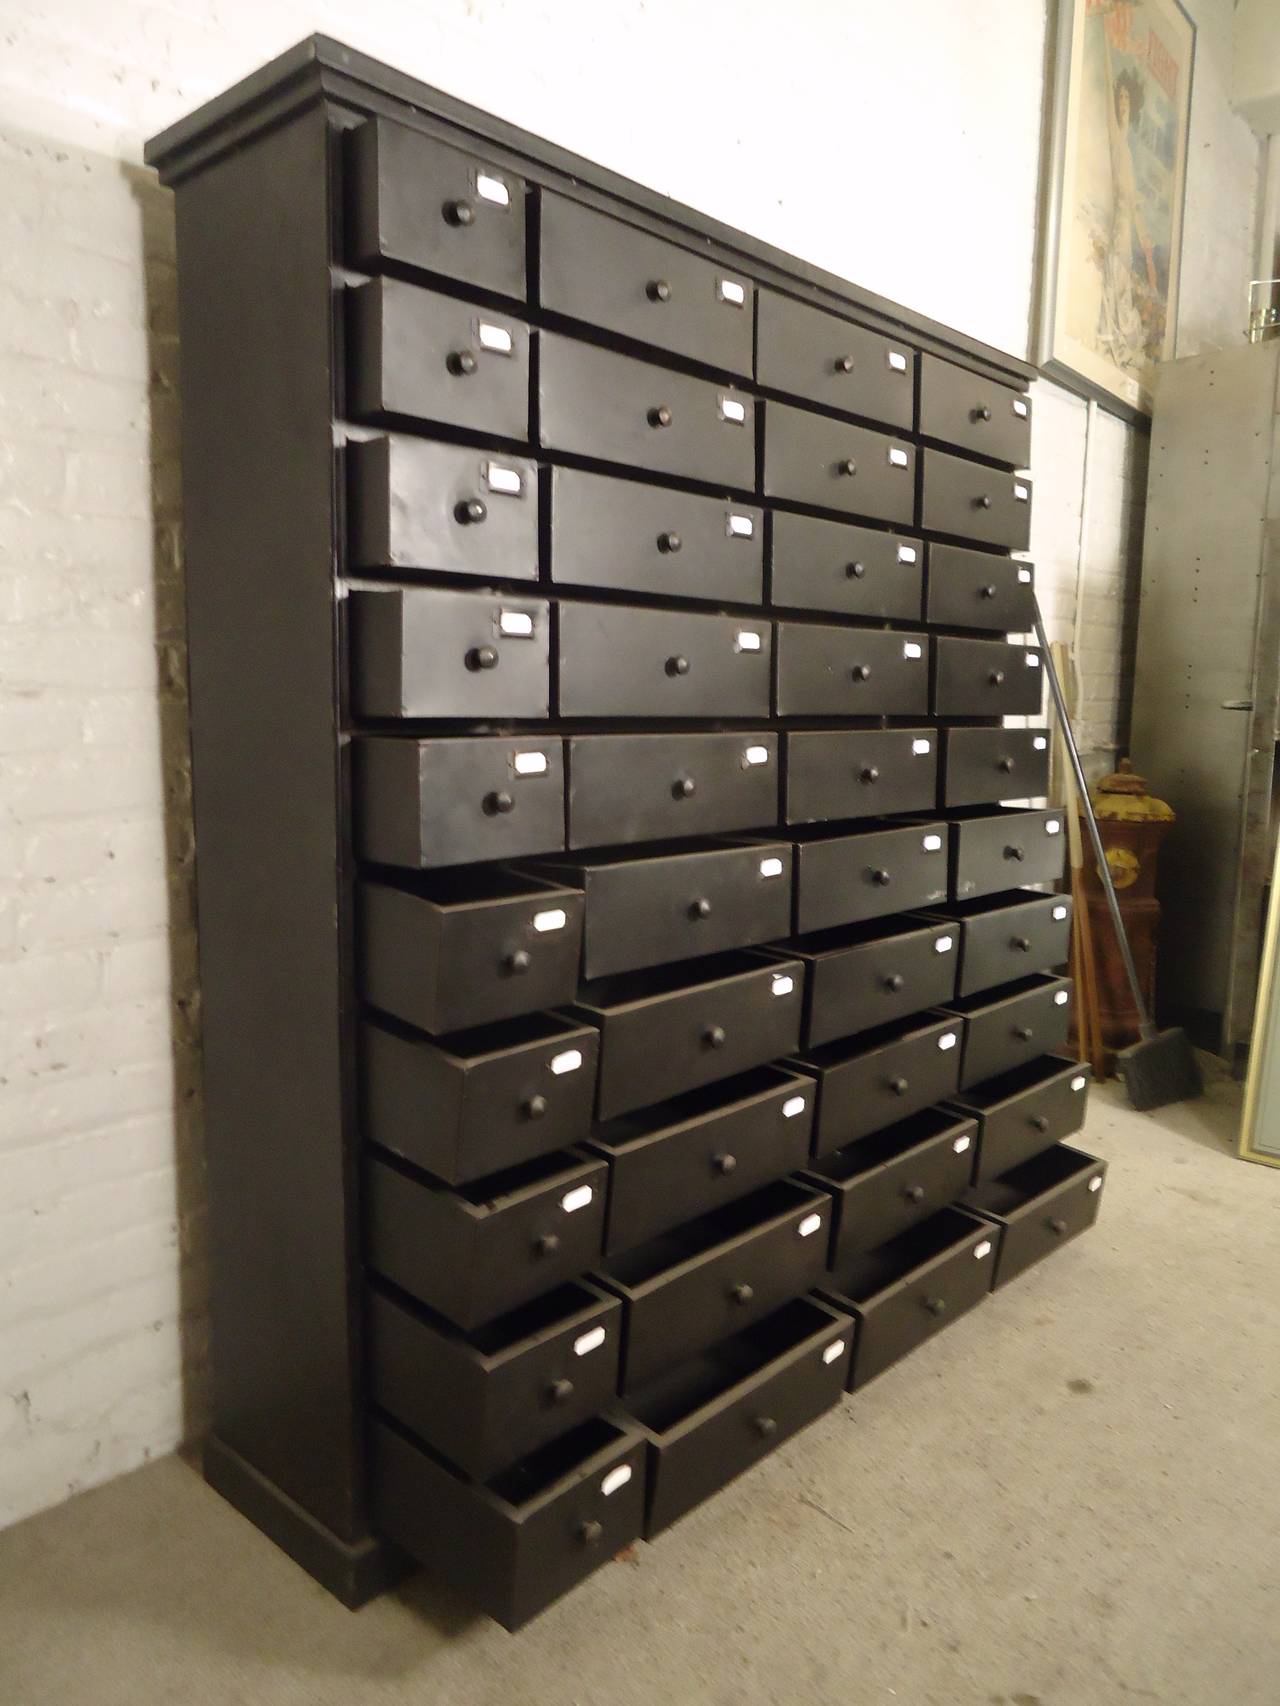 This large-scale industrial modern file cabinet features metal construction with forty drawers of varying size, all with label holders. Great for retail, office, or home display and storage, the unique vintage industrial style makes great room or